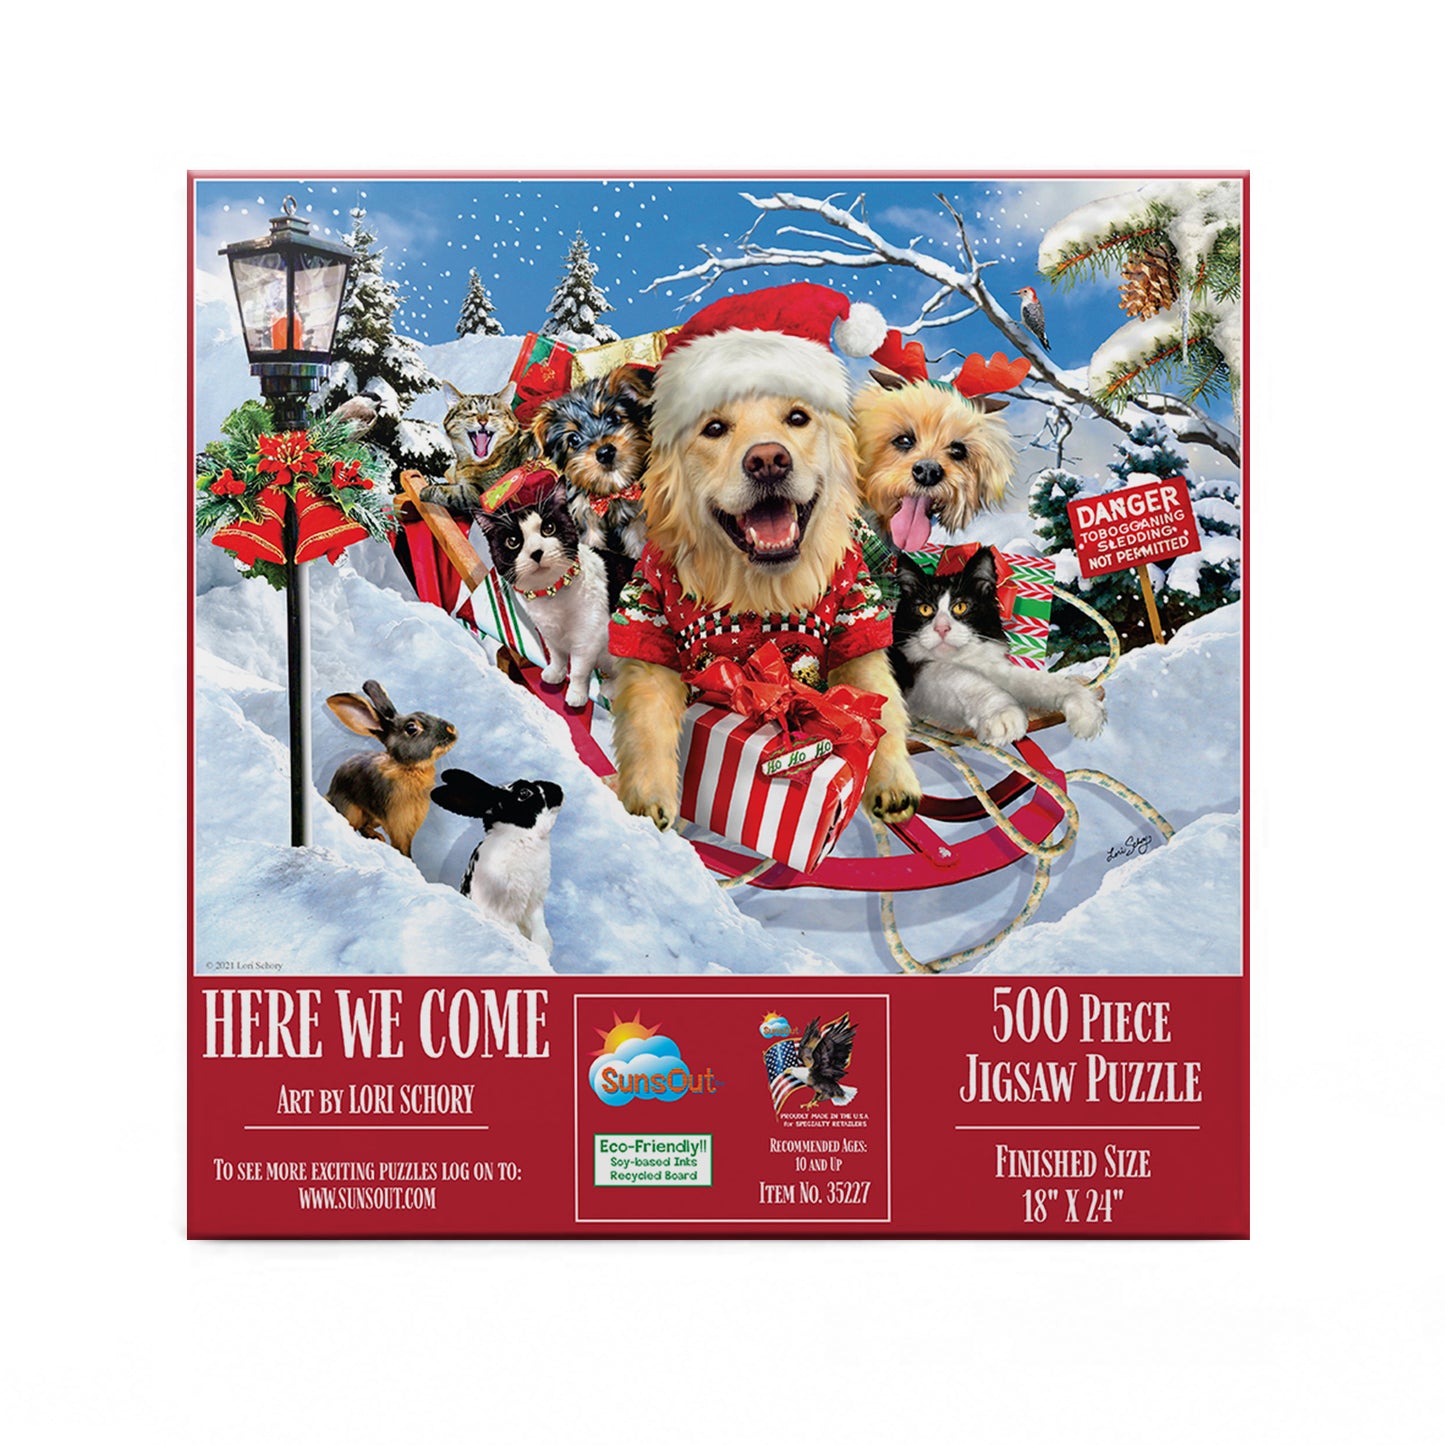 Here We Come - 500 Piece Jigsaw Puzzle